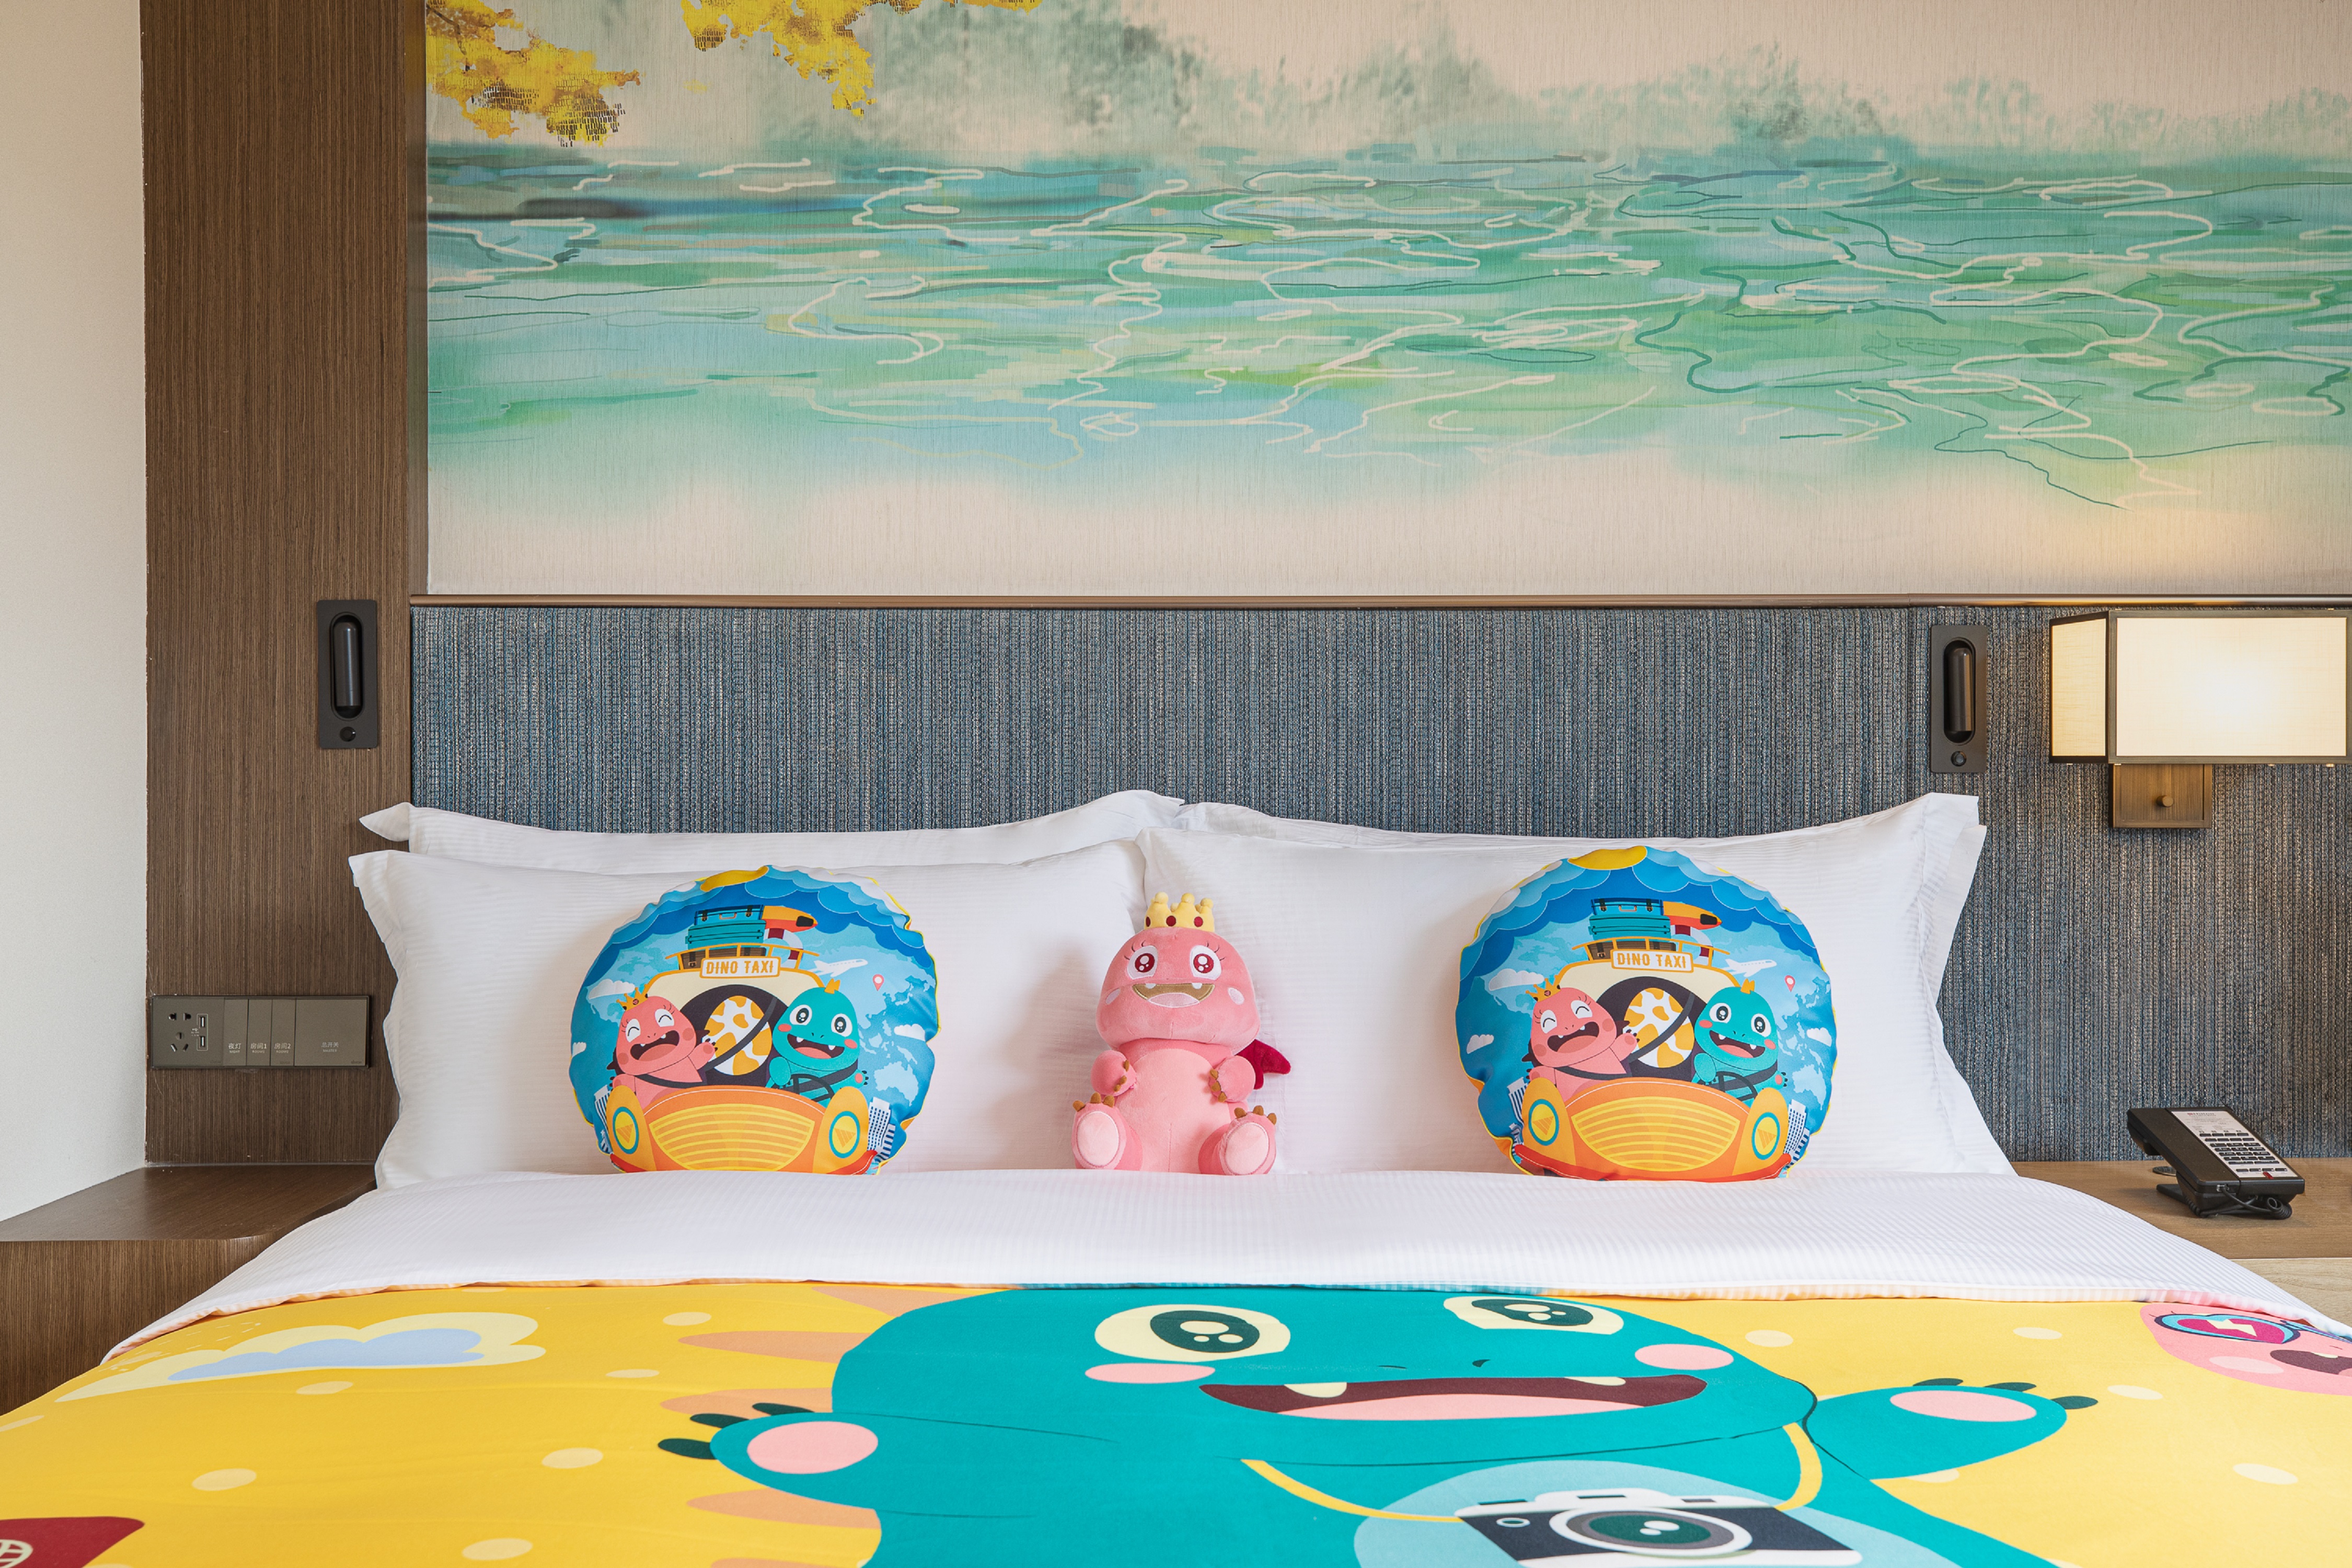 Bed in room with toys and cartoons on duvet